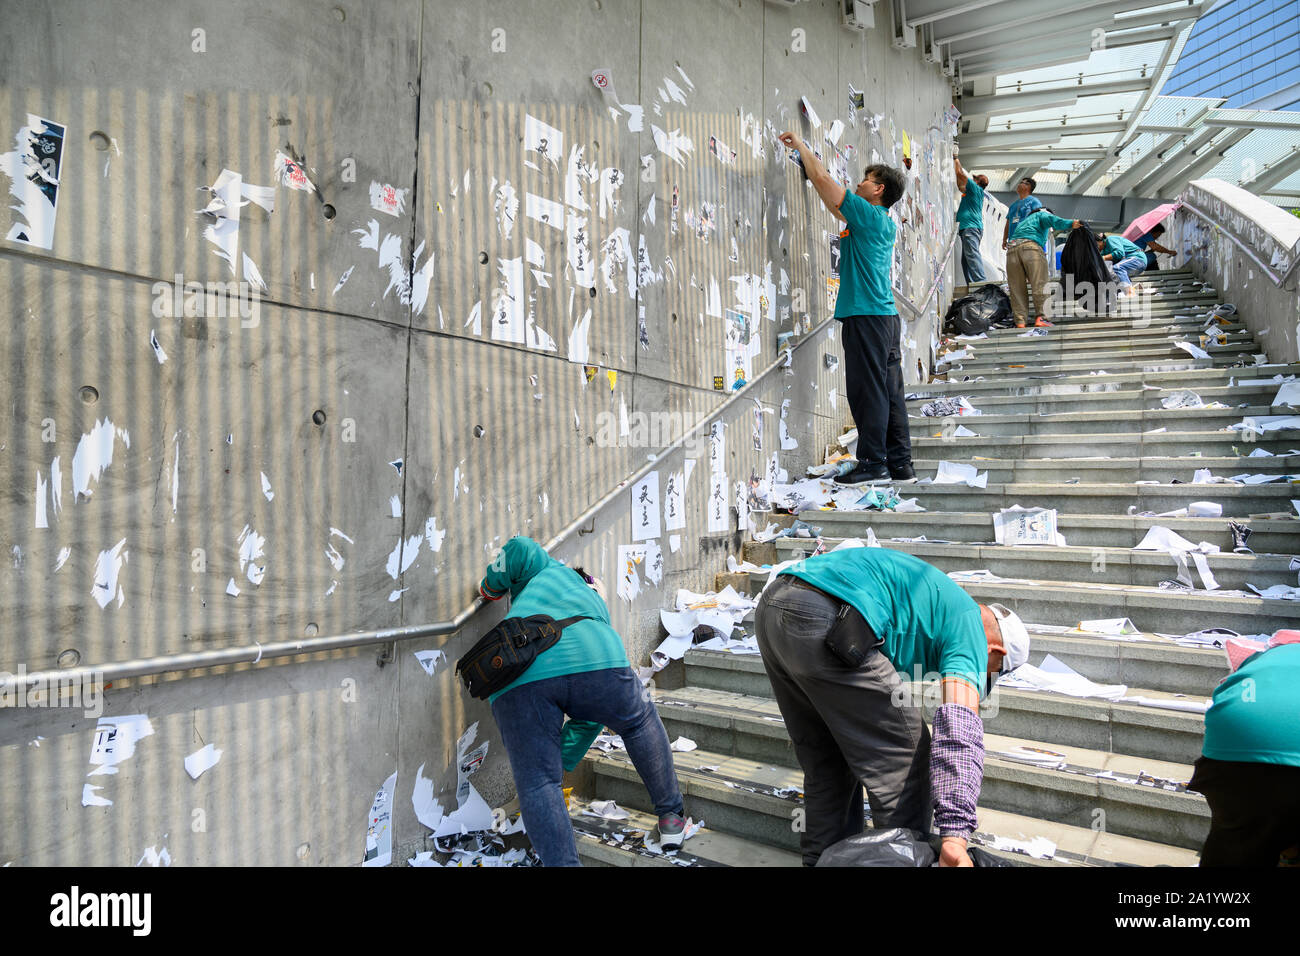 29 September 2019 Tamar, Admiralty, Hong Kong. Clean up after the protest marking the 5th anniversary of the Umbrella Movement the day before. Stock Photo